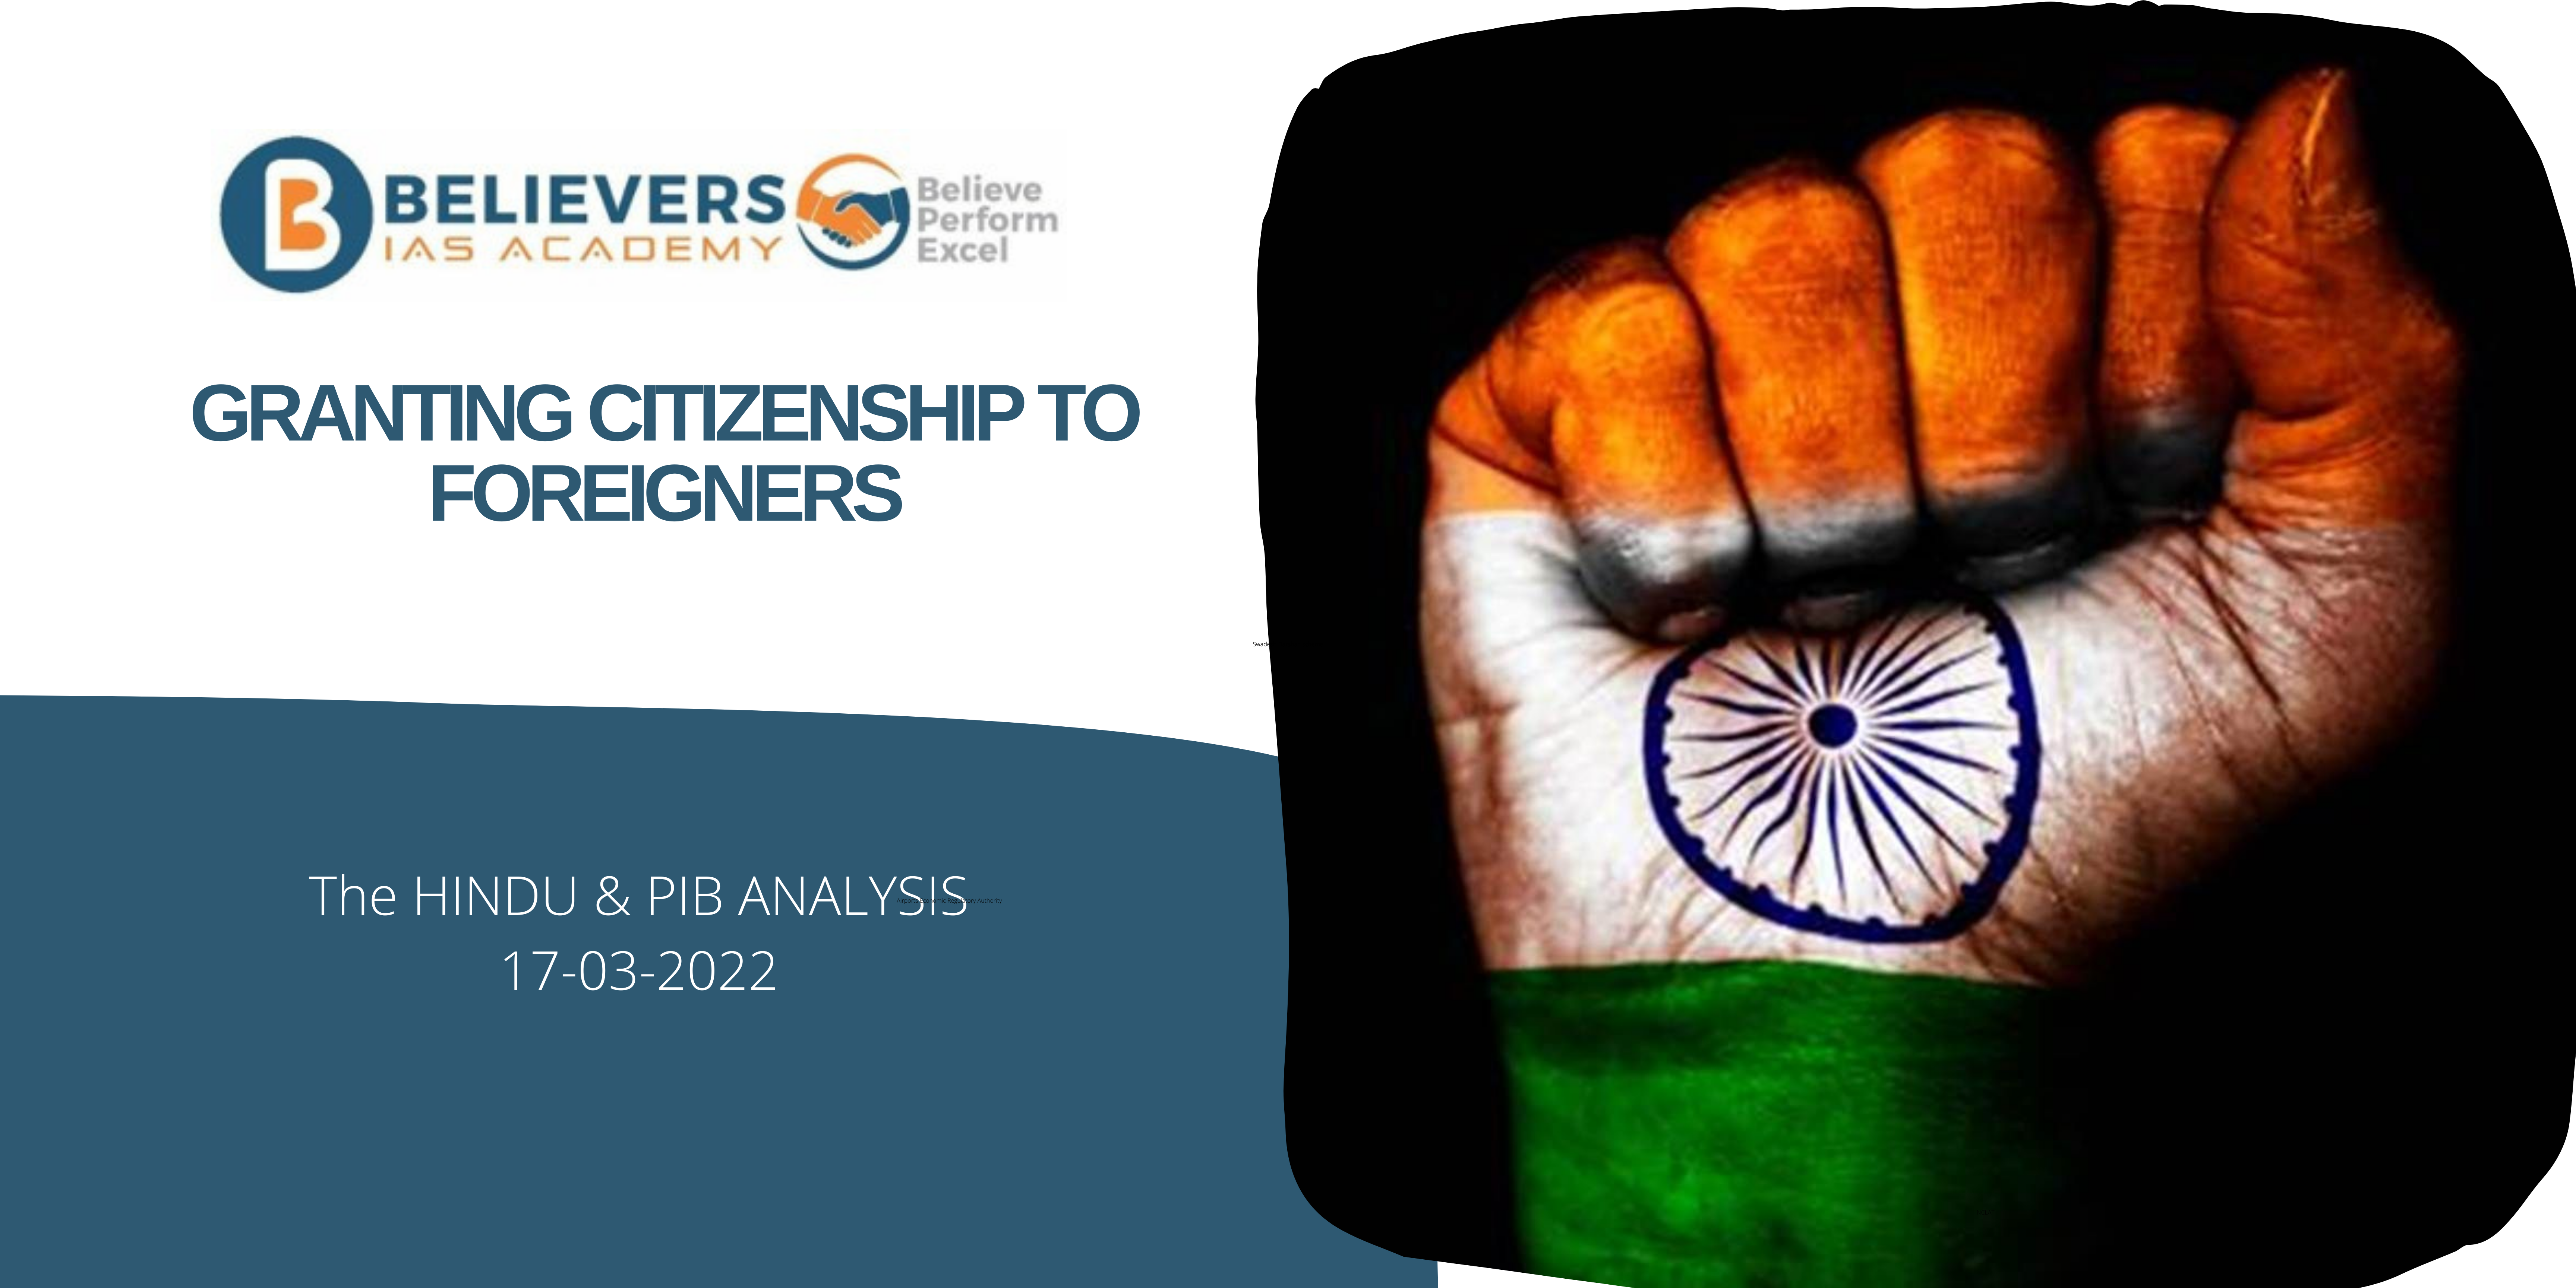 UPSC Current affairs - Granting Citizenship to Foreigners